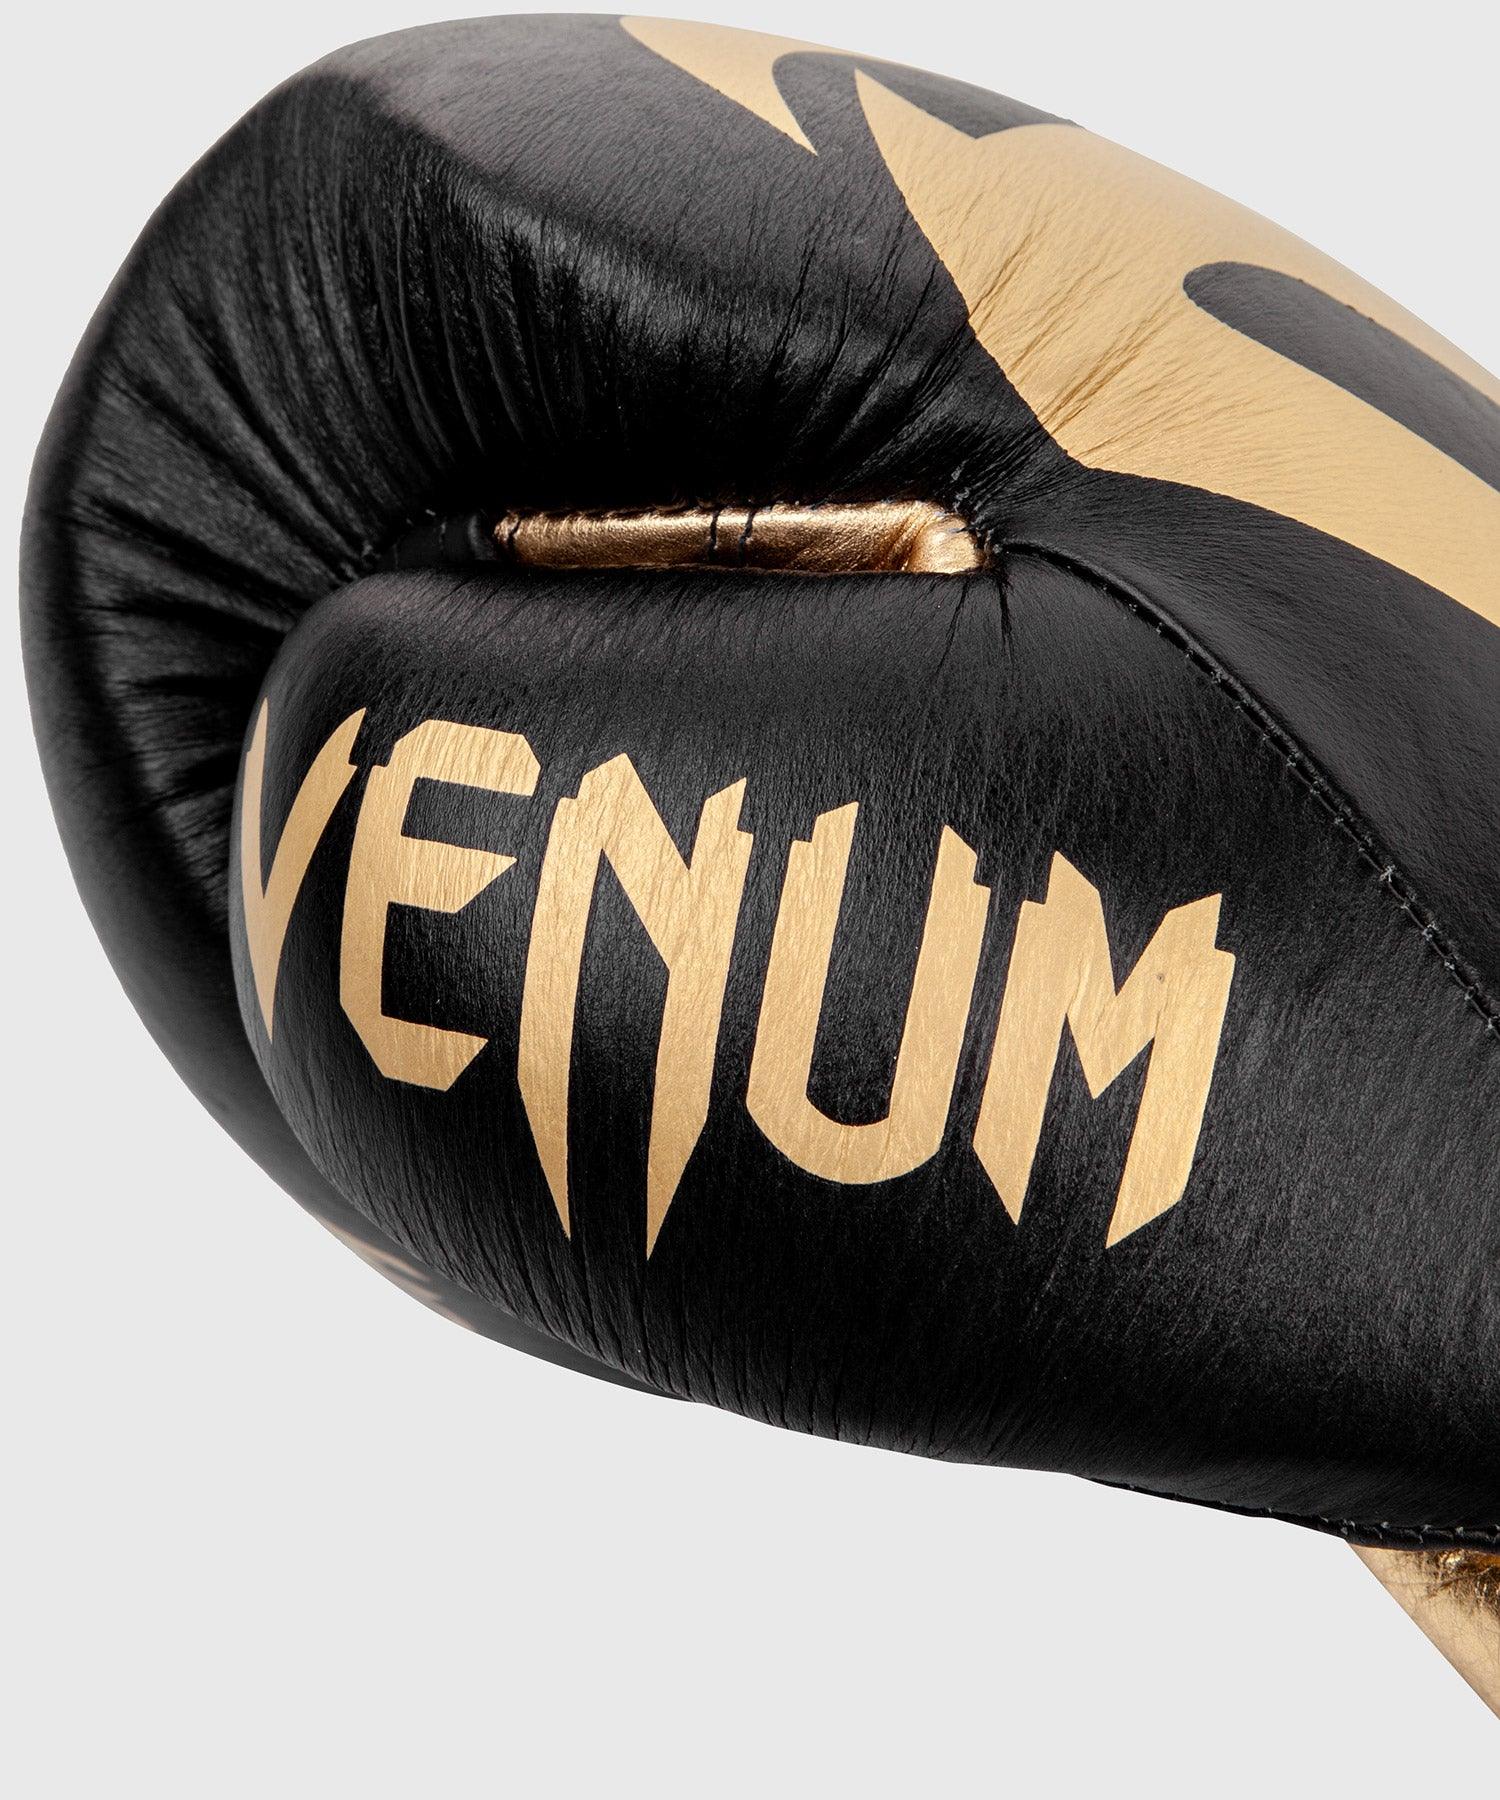 Venum Giant 2.0 Pro Boxing Gloves - With Laces - Black/Gold Picture 4